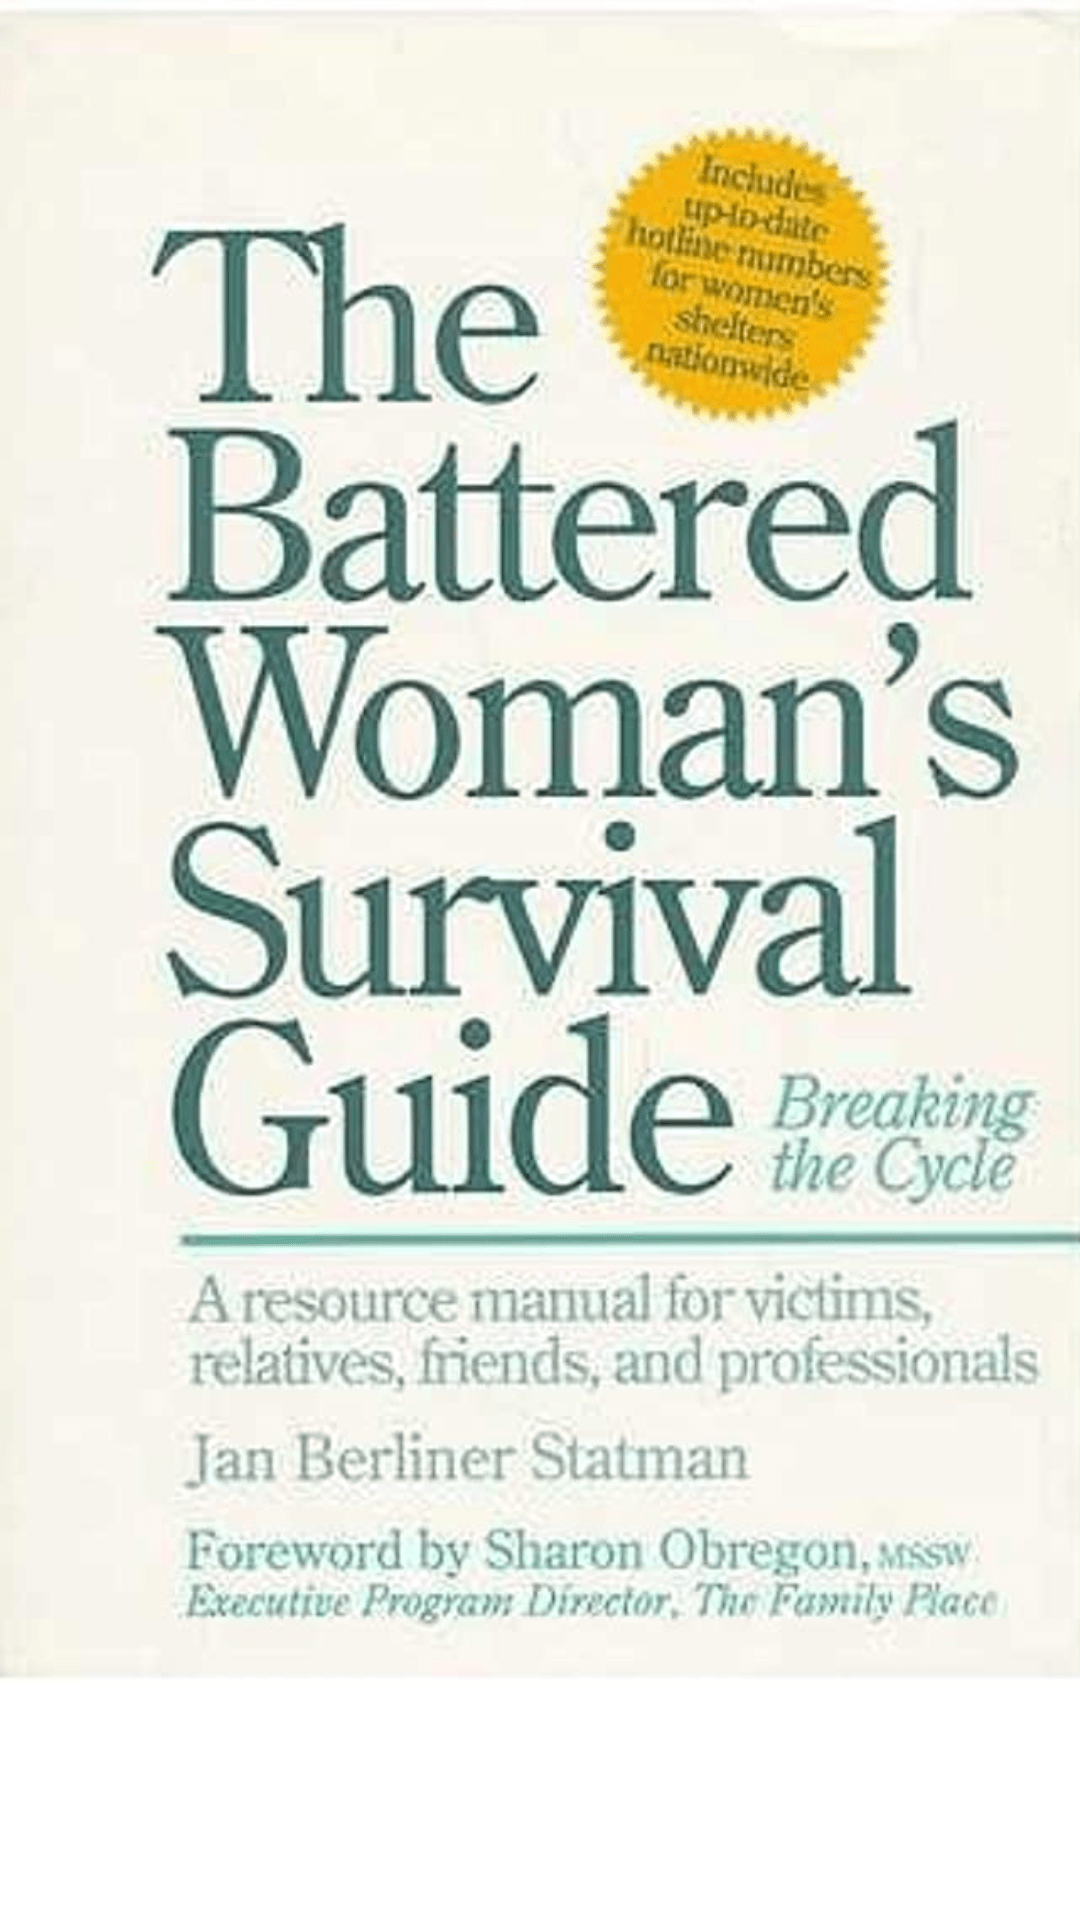 The Battered Woman's Survival Guide: Breaking the Cycle